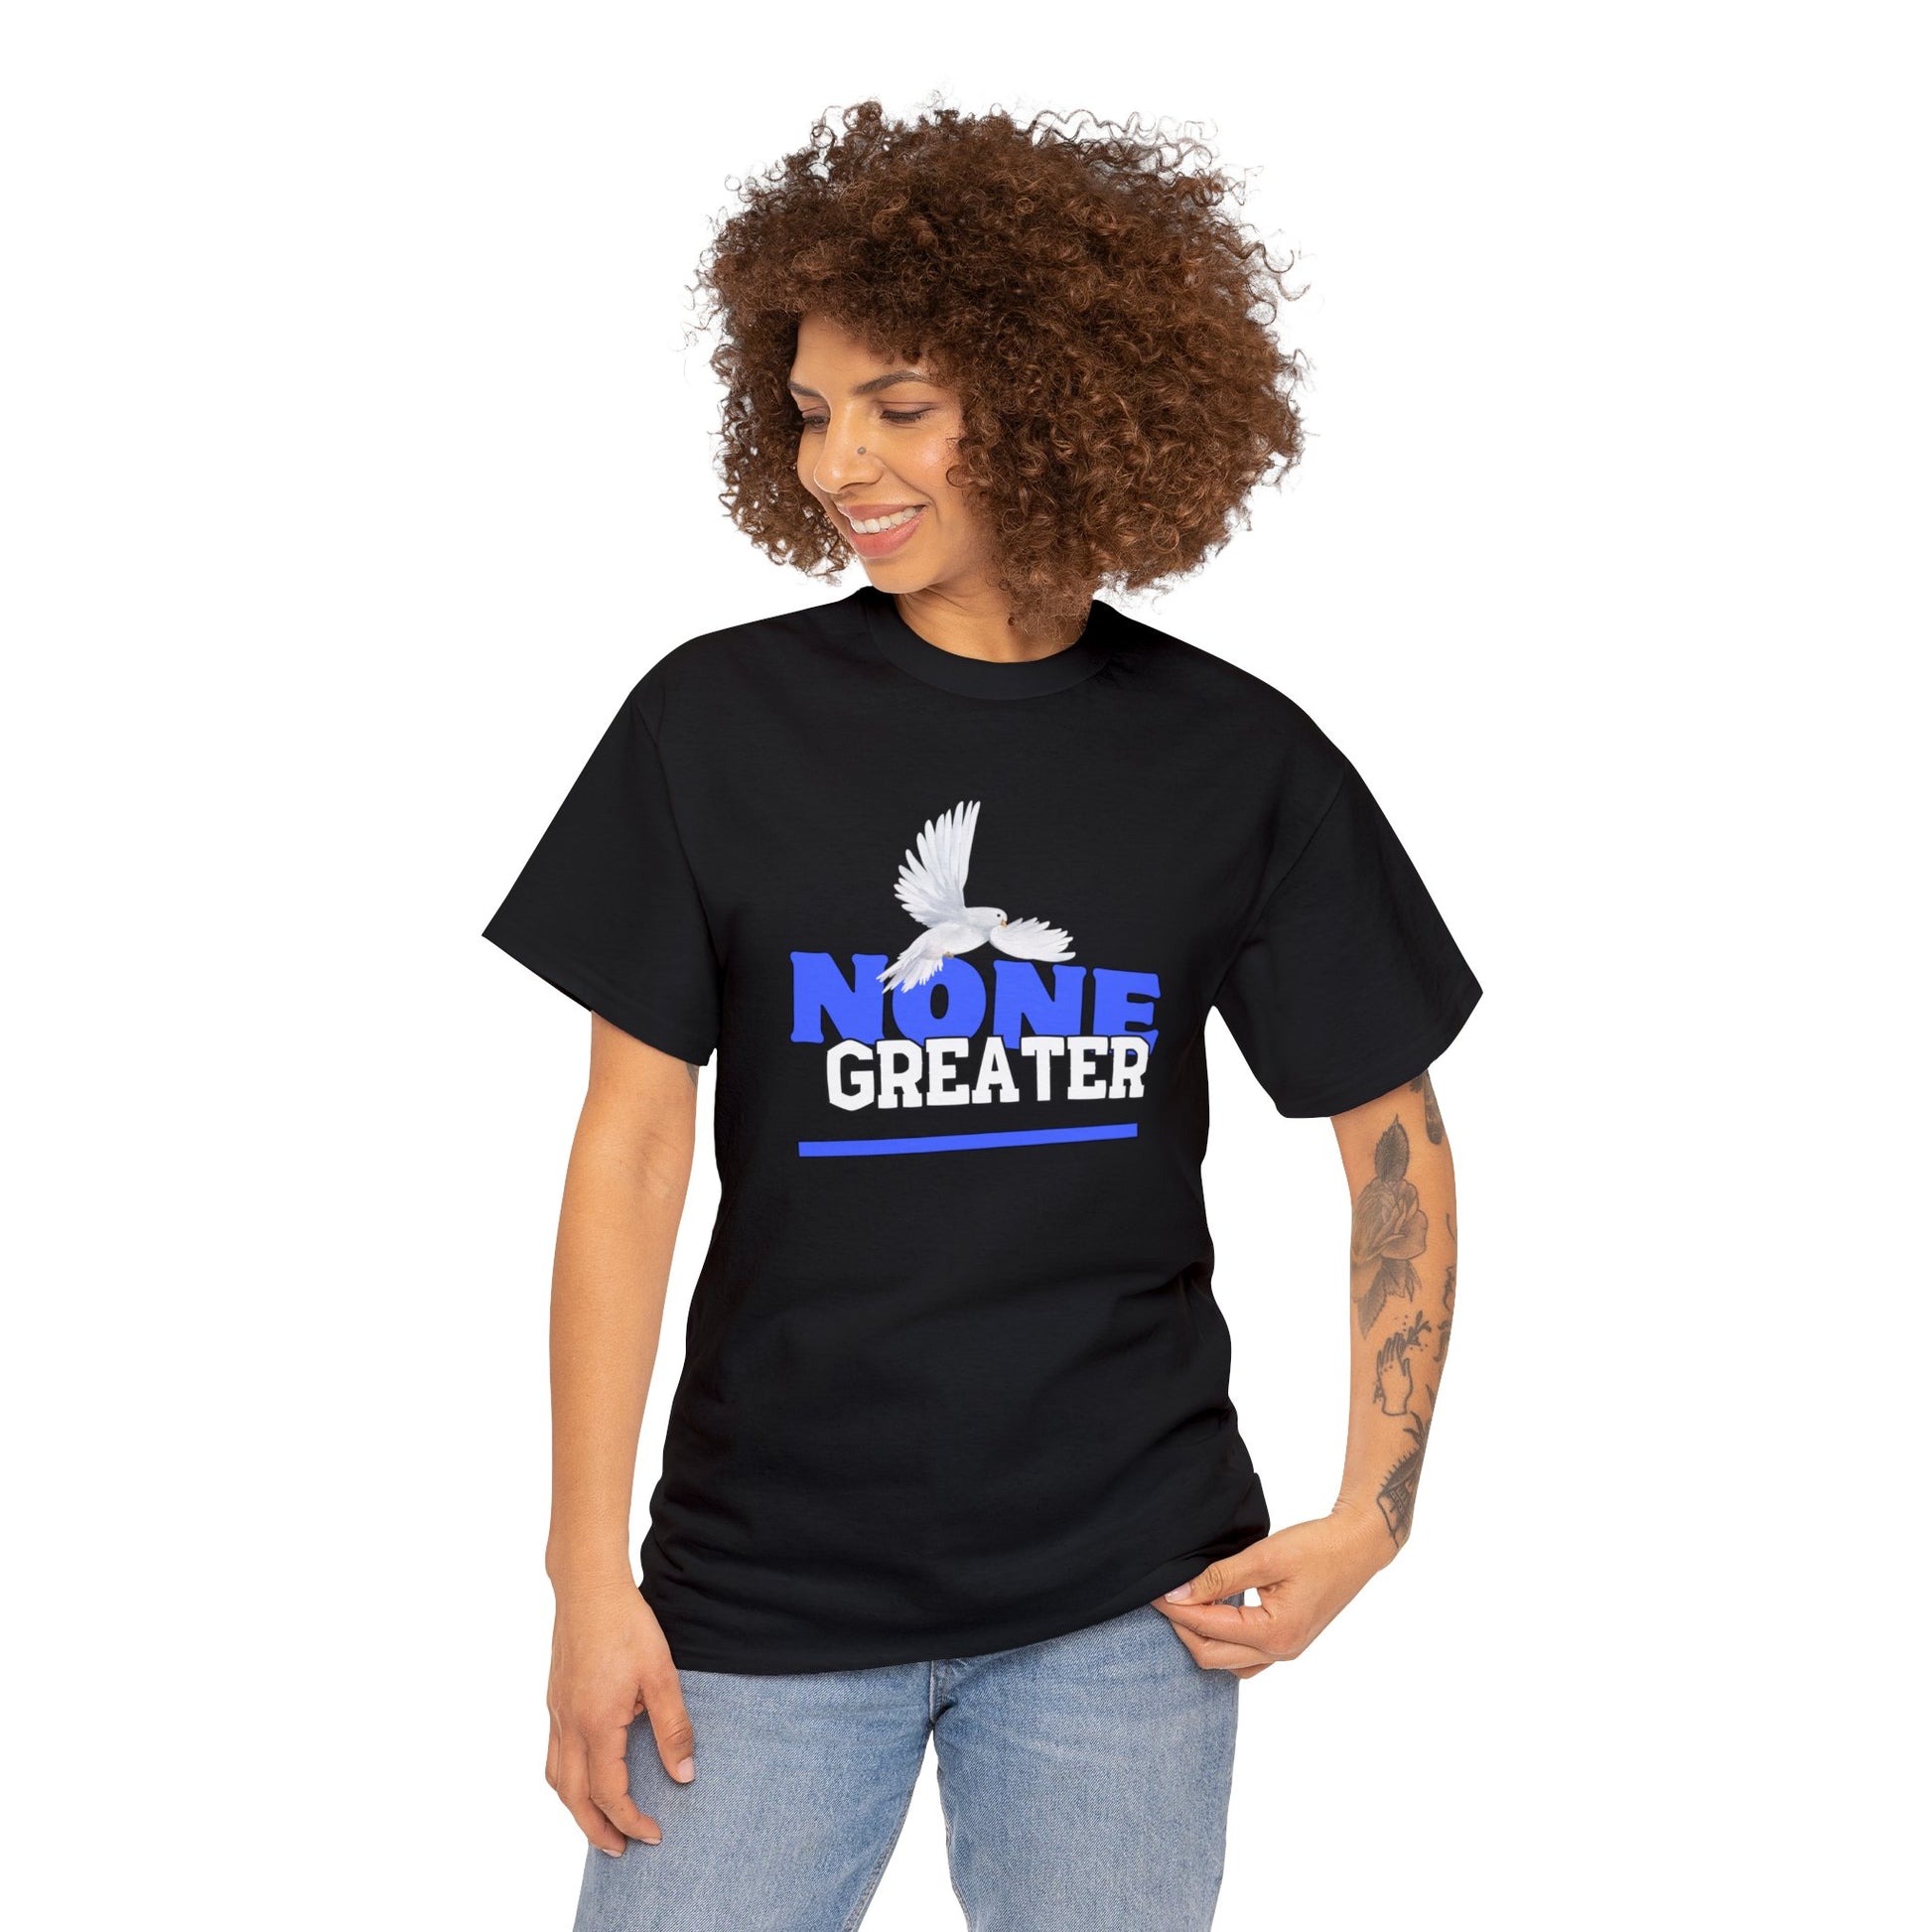 Black Unisex Heavy Cotton Tee w/White Dove, Royal Blue and White Letters saying "None Greater"